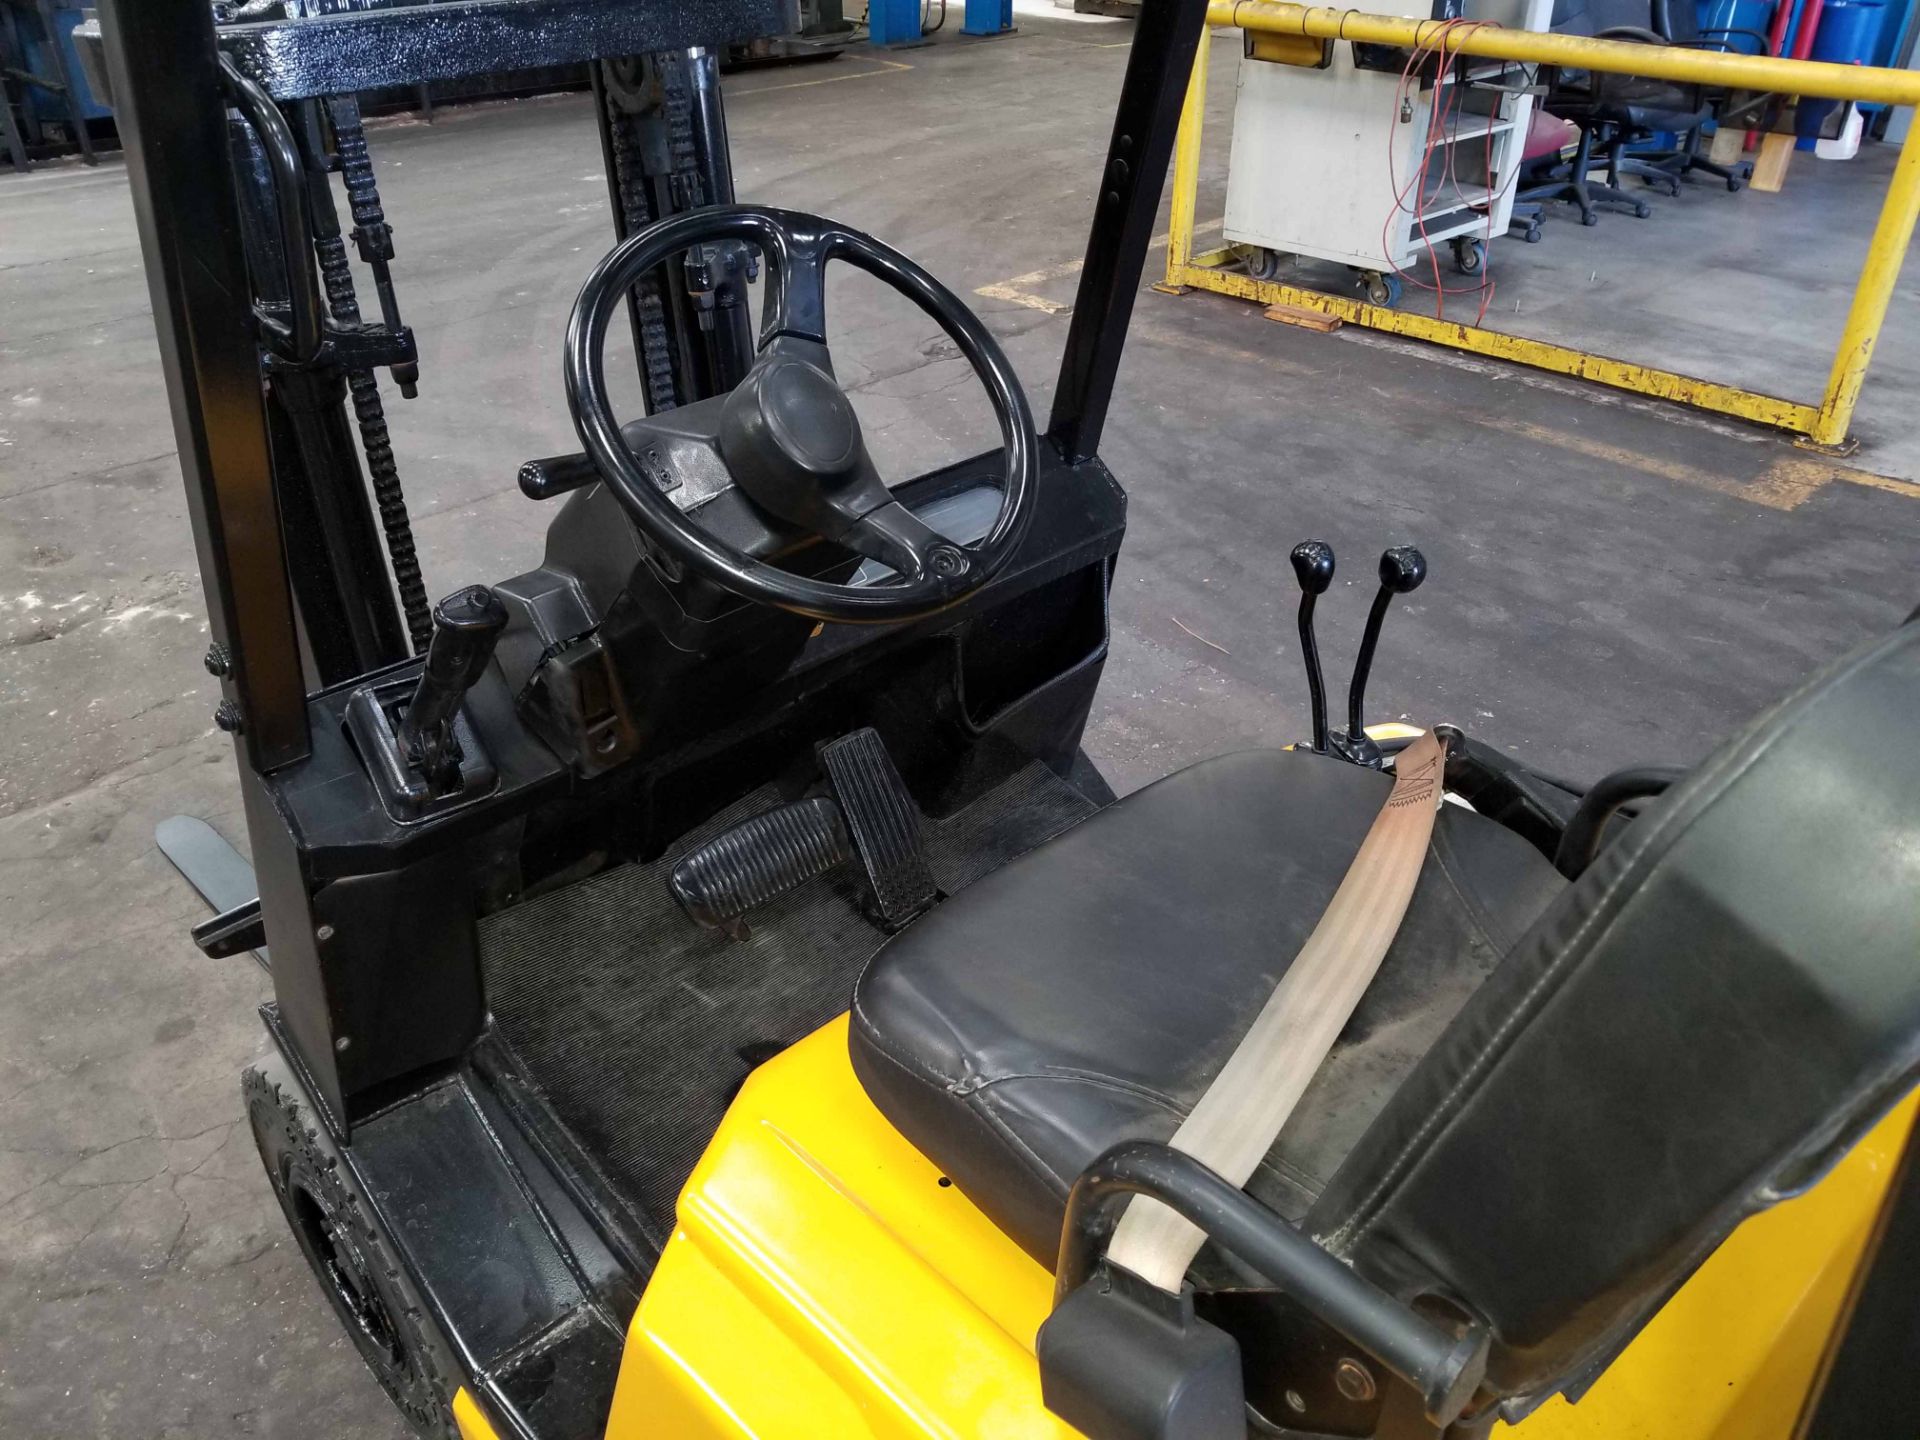 FORKLIFT, YALE 3,000 LB. CAP. MDL. GLP030, new 2004, LPG, 2-stage mast, 84” lift height, pneu. style - Image 4 of 4